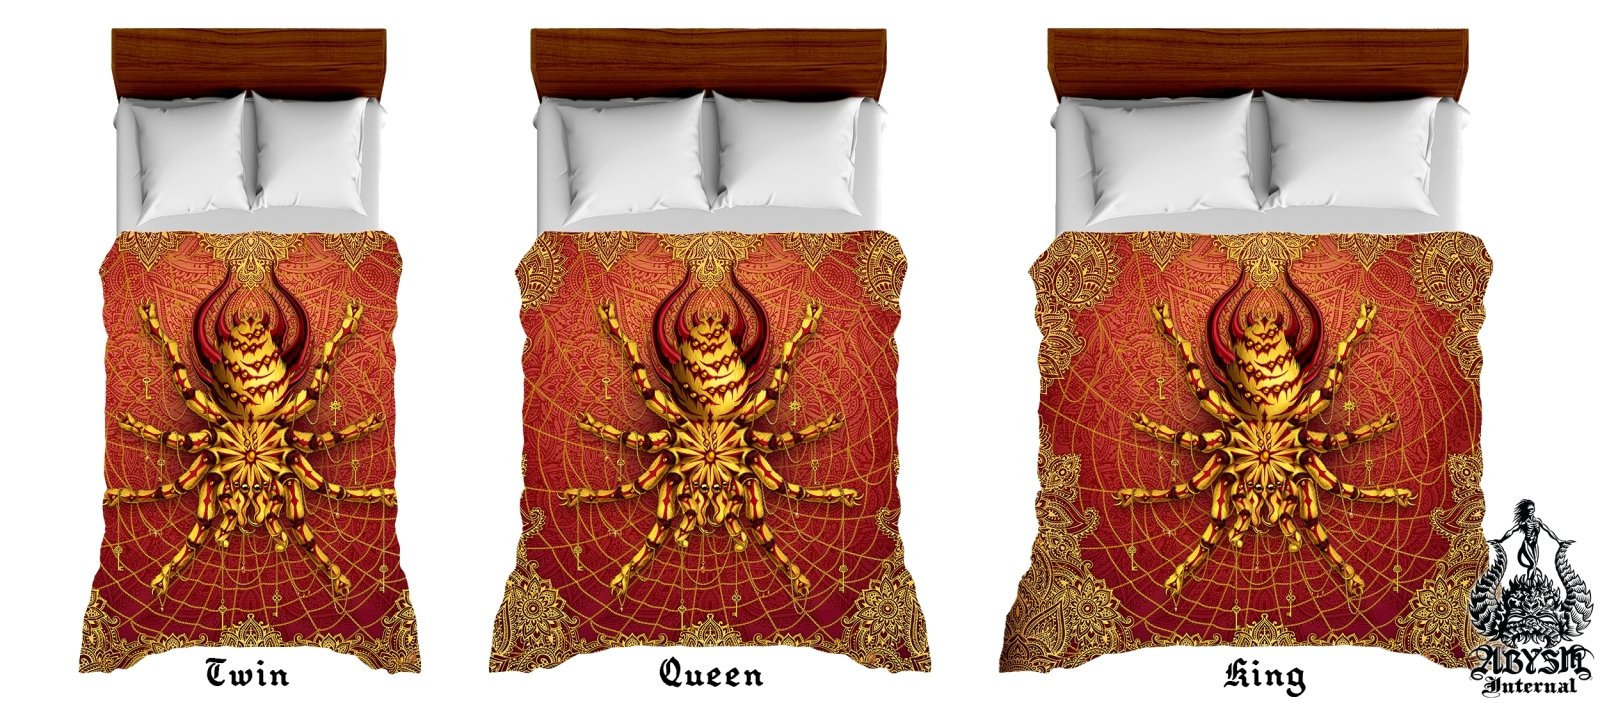 Boho Bedding Set, Comforter and Duvet, Bed Cover and Bedroom Decor, King, Queen and Twin Size - Tarantula Spider - Abysm Internal